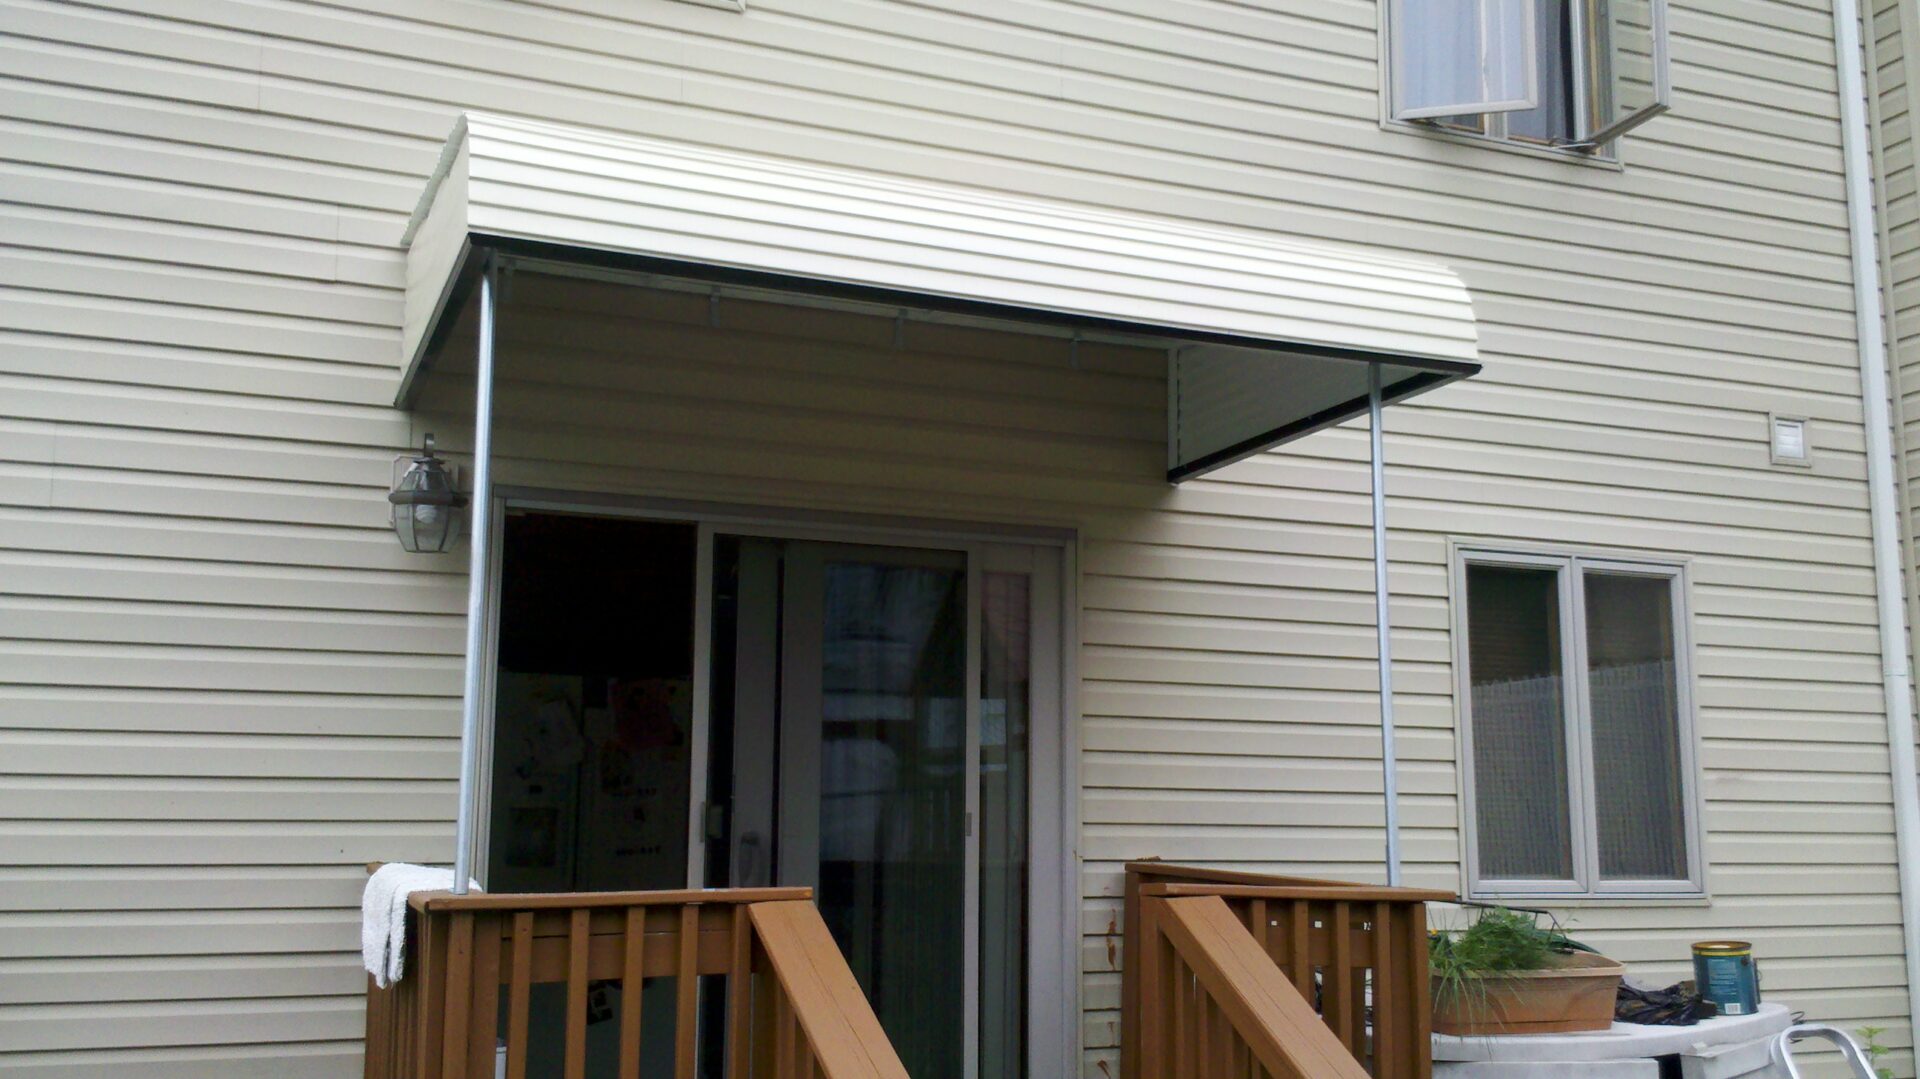 Edge Signs and Awnings